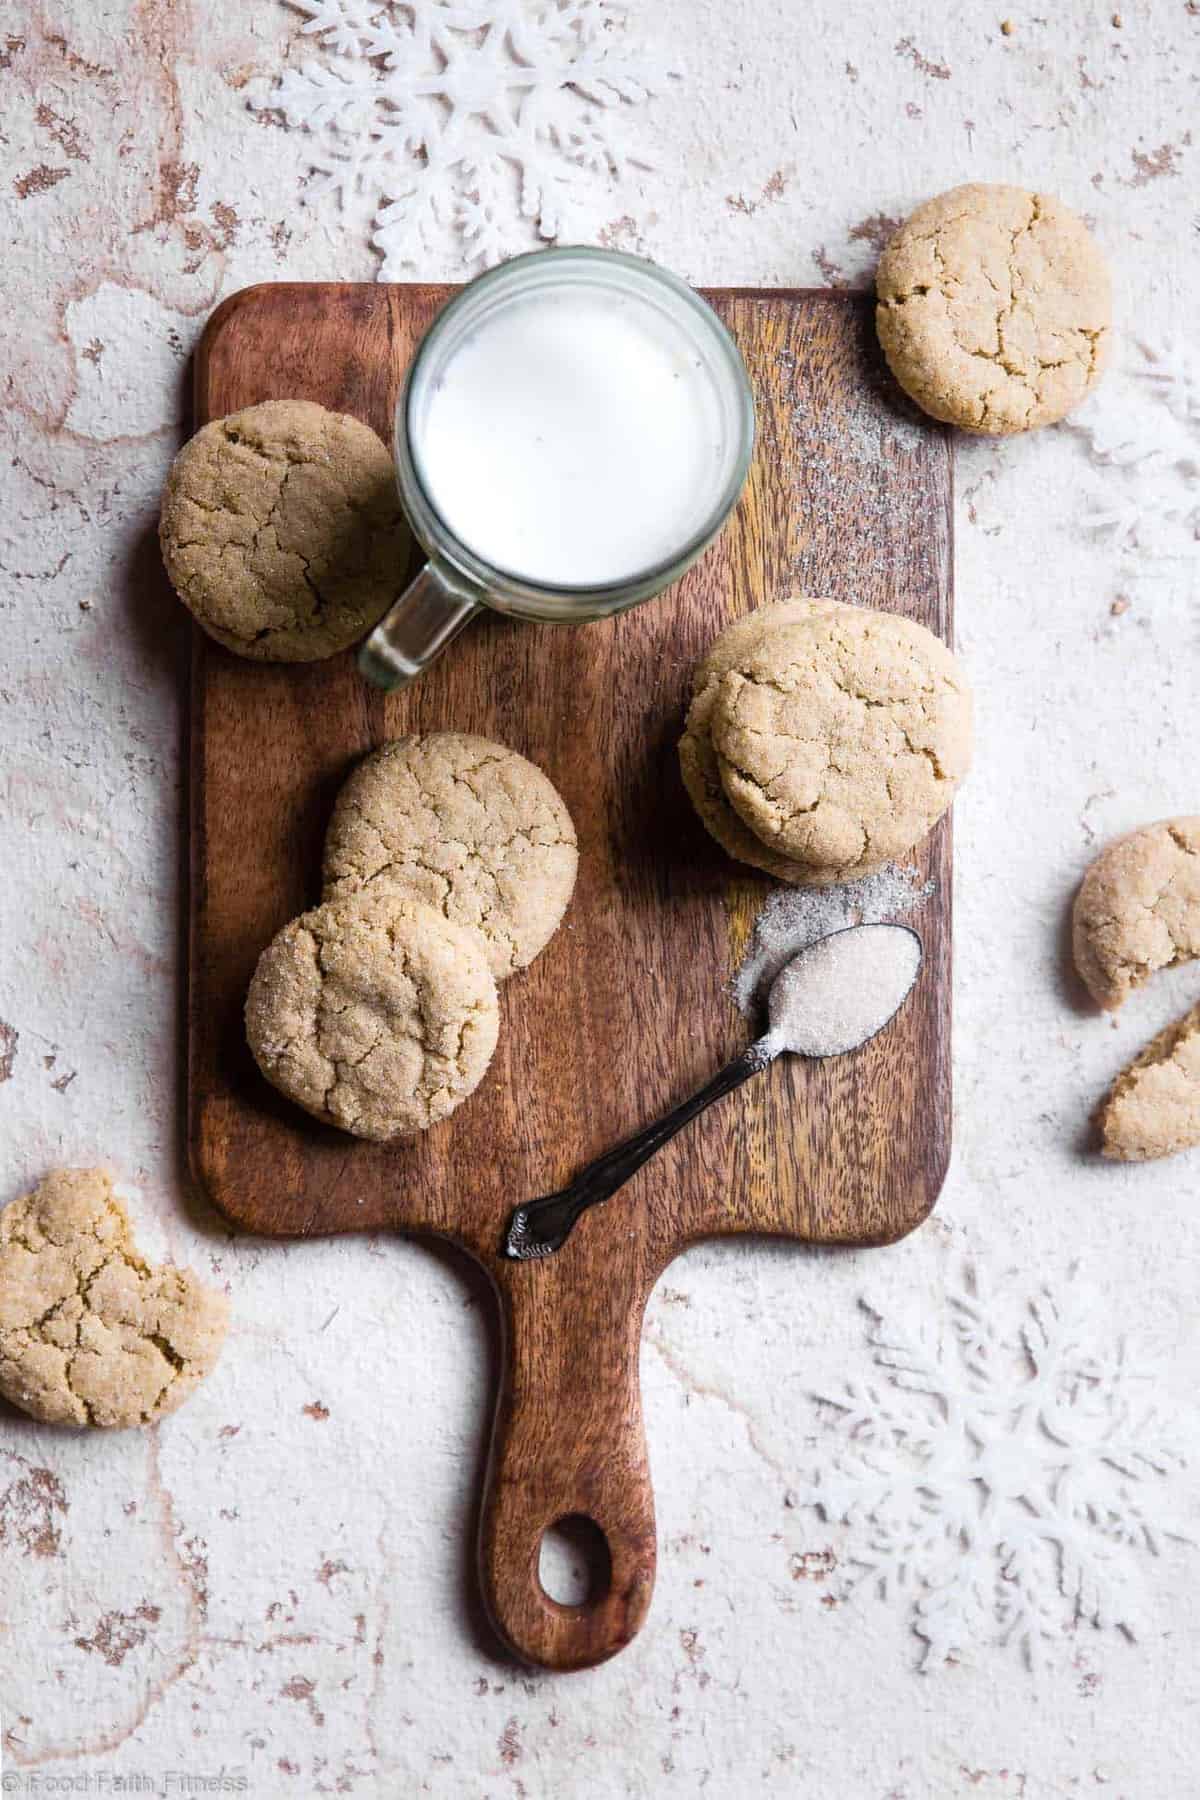 Soft Gluten Free Vegan Sugar Cookies - These SOFT and CHEWY Dairy Free Sugar Cookies are SO easy to make and seriously tasty! No one will believe these are healthy, dairy and egg free and only 115 calories! | #Foodfaithfitness | #vegan #healthy #dairyfree #eggfree #glutenfree